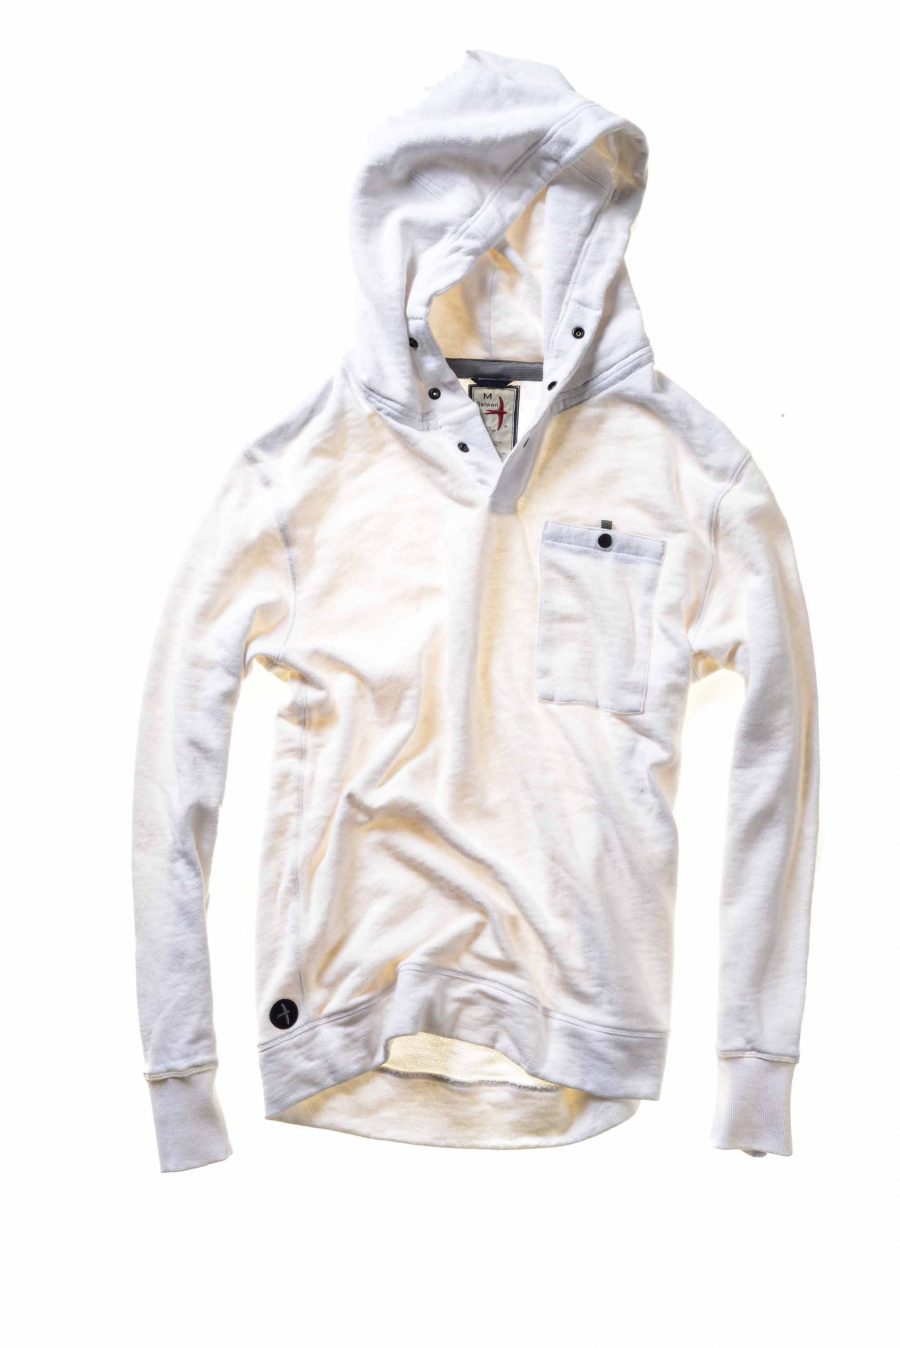 Grab the Relwen Windsurf Hoodie For Those Summer Nights